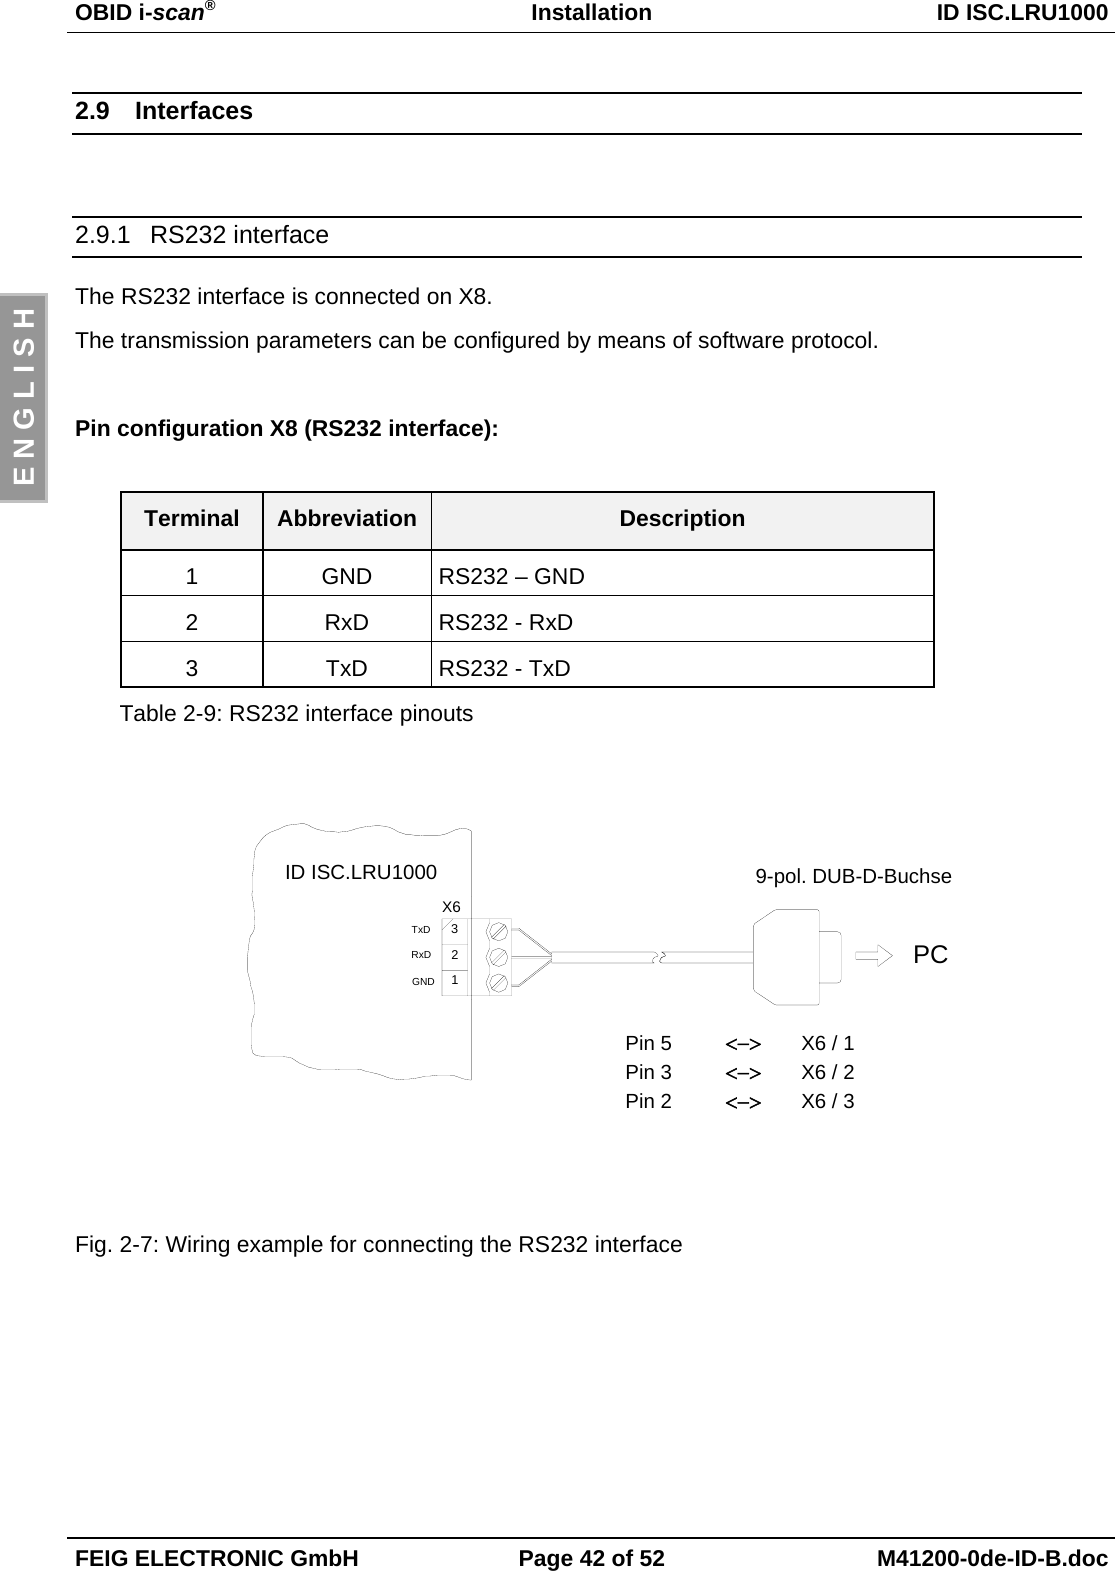 OBID i-scan®Installation ID ISC.LRU1000FEIG ELECTRONIC GmbH Page 42 of 52 M41200-0de-ID-B.docE N G L I S H2.9 Interfaces2.9.1 RS232 interfaceThe RS232 interface is connected on X8.The transmission parameters can be configured by means of software protocol.Pin configuration X8 (RS232 interface):Terminal Abbreviation Description1 GND RS232 – GND2 RxD RS232 - RxD3 TxD RS232 - TxDTable 2-9: RS232 interface pinoutsFig. 2-7: Wiring example for connecting the RS232 interfaceX6 / 1Pin 59-pol. DUB-D-BuchseGNDRxDTxDID ISC.LRU1000123X6PC&lt;−&gt;&lt;−&gt;&lt;−&gt;X6 / 3Pin 2X6 / 2Pin 3